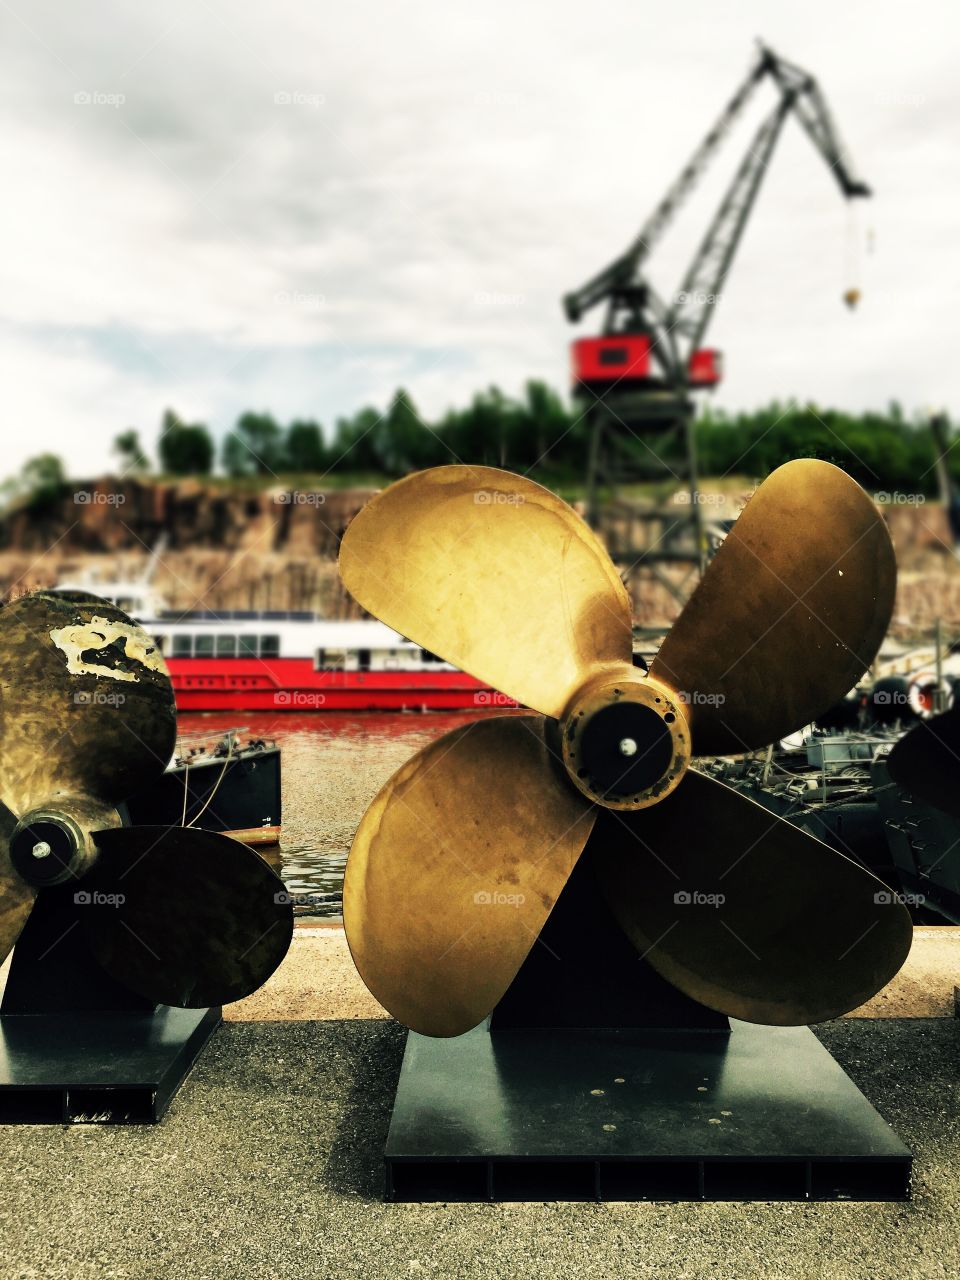 Power elements. Boat propellers in the harbor museum in Turku, Finland